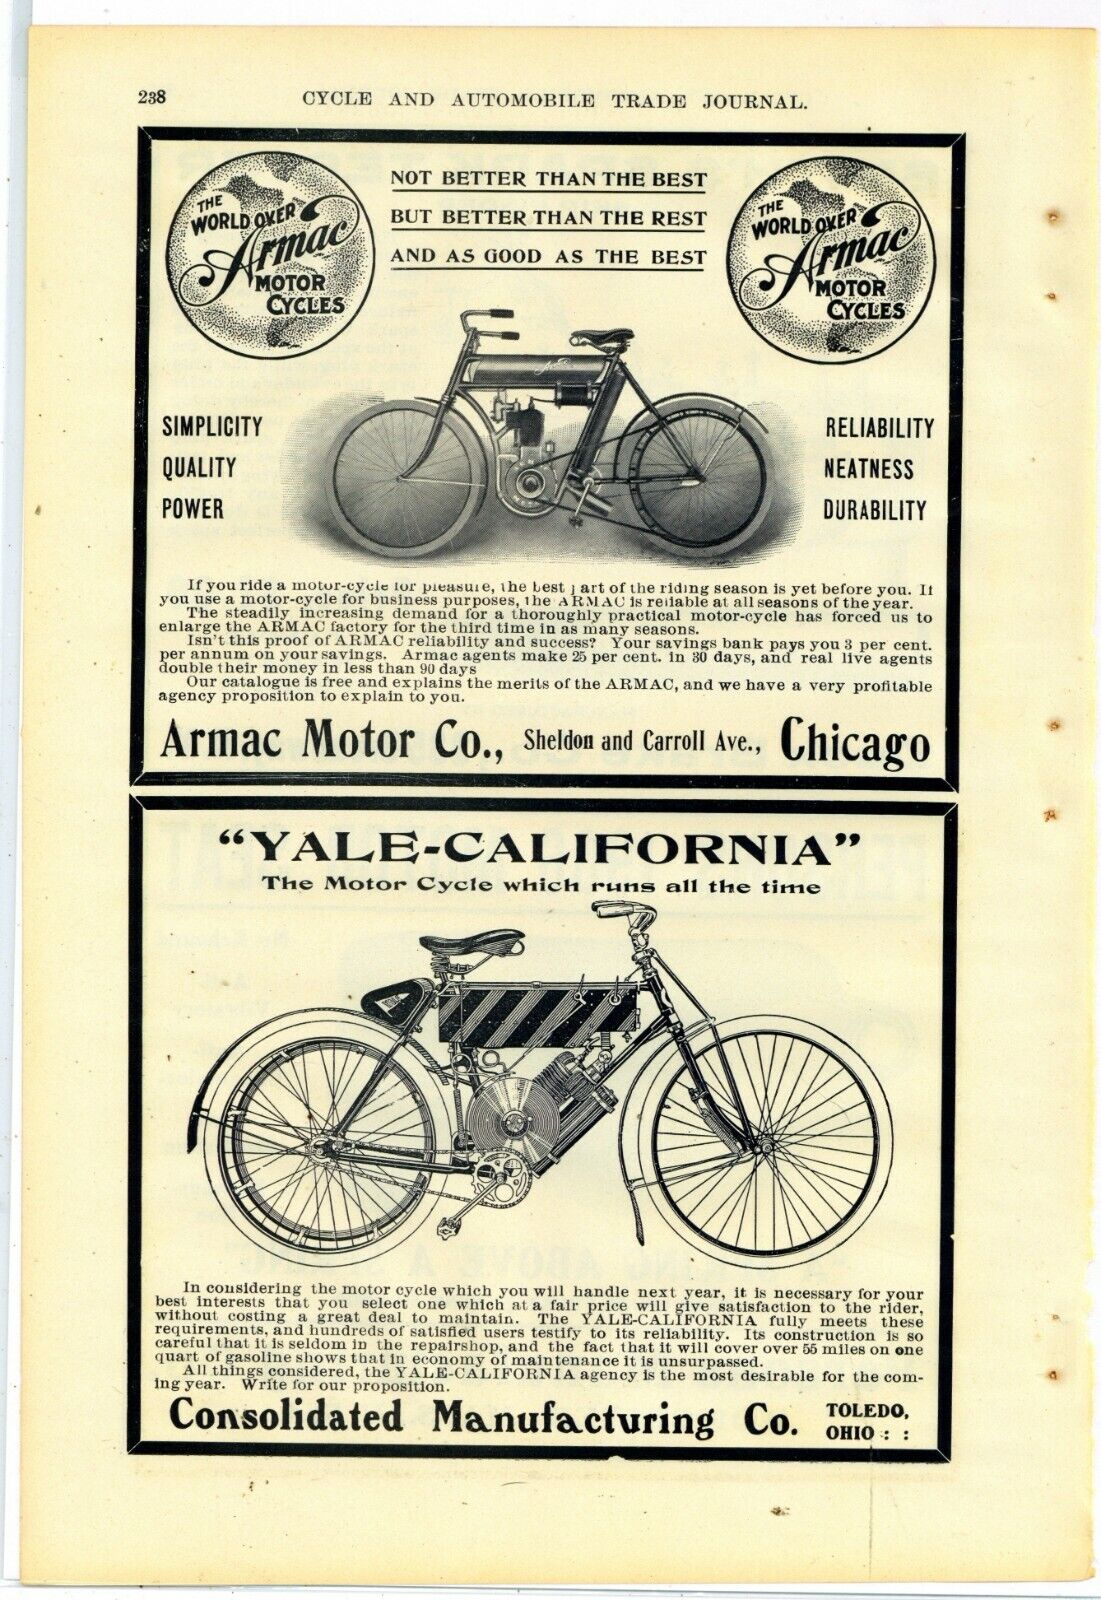 1906 Armac Motorcycles AND Yale California of Toledo, OhiO Ads - Both on Same pg